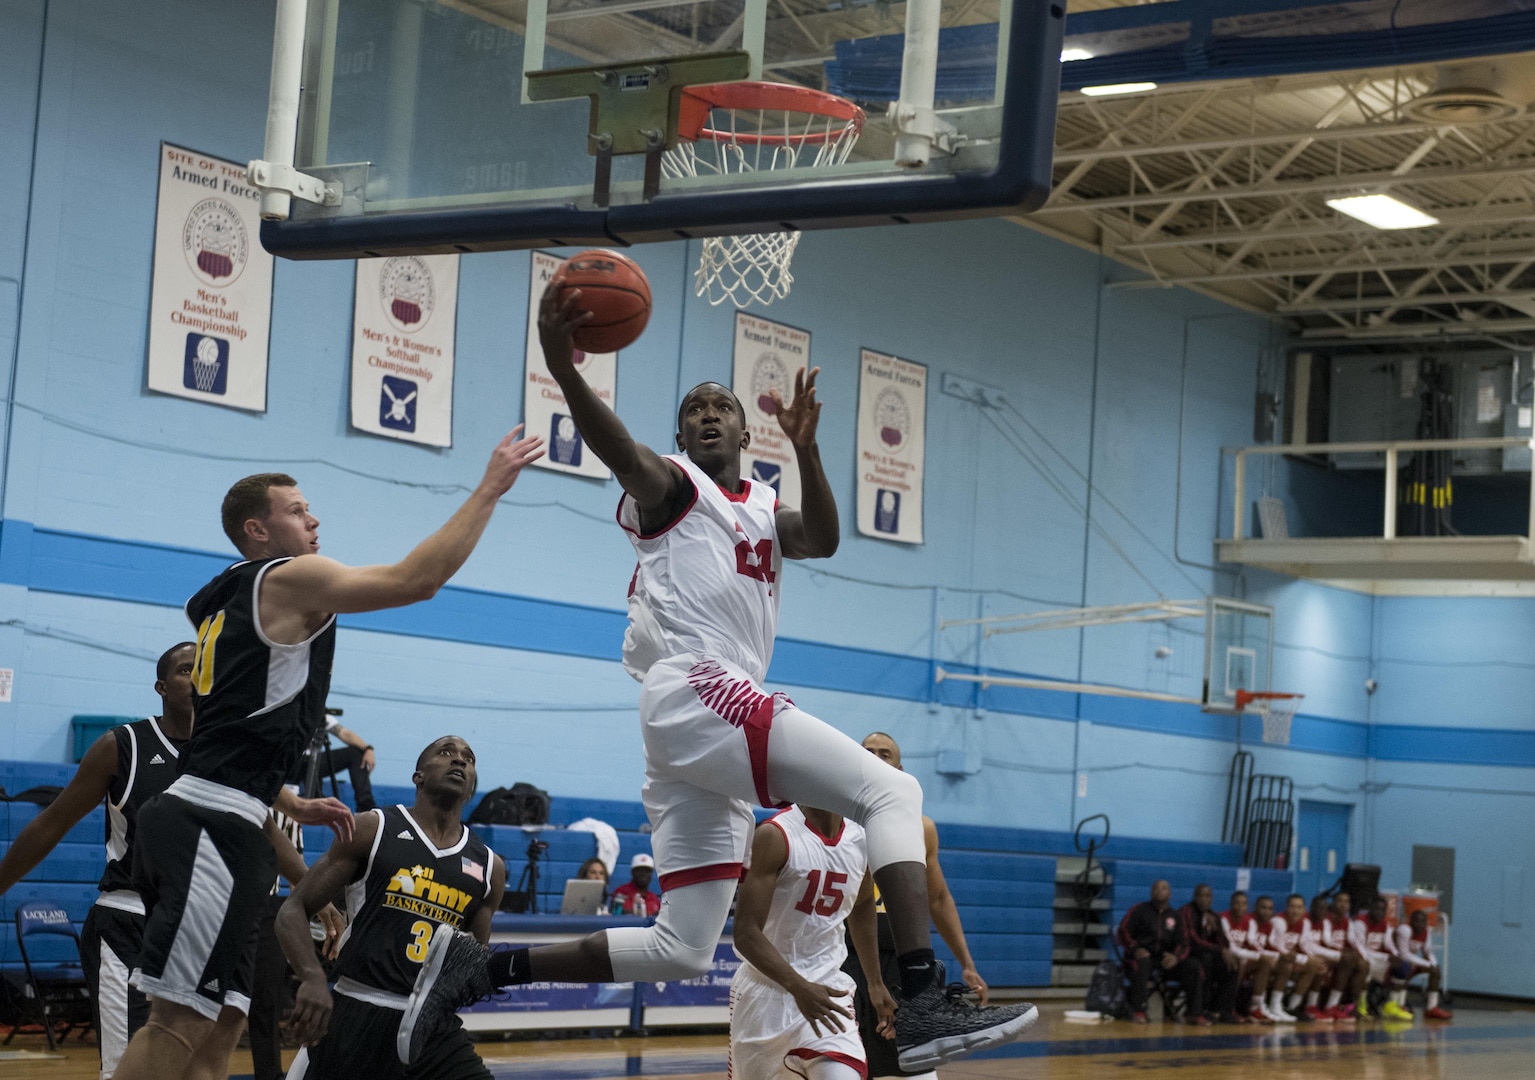 SAN ANTONIO (Nov. 01, 2017) - U.S. Marine Corps Cpl. Sean Stewart, assigned to Marine Corps Base Okinawa scores a layup during a basketball game. The 2017 Armed Forces Basketball Championship is held at Joint Base San Antonio, Lackland Air Force Base from 1-7 November. The best two teams during the double round robin will face each other for the 2017 Armed Forces crown. (U.S. Navy photo by Mass Communication Specialist 2nd Class Emiline L. M. Senn/Released)